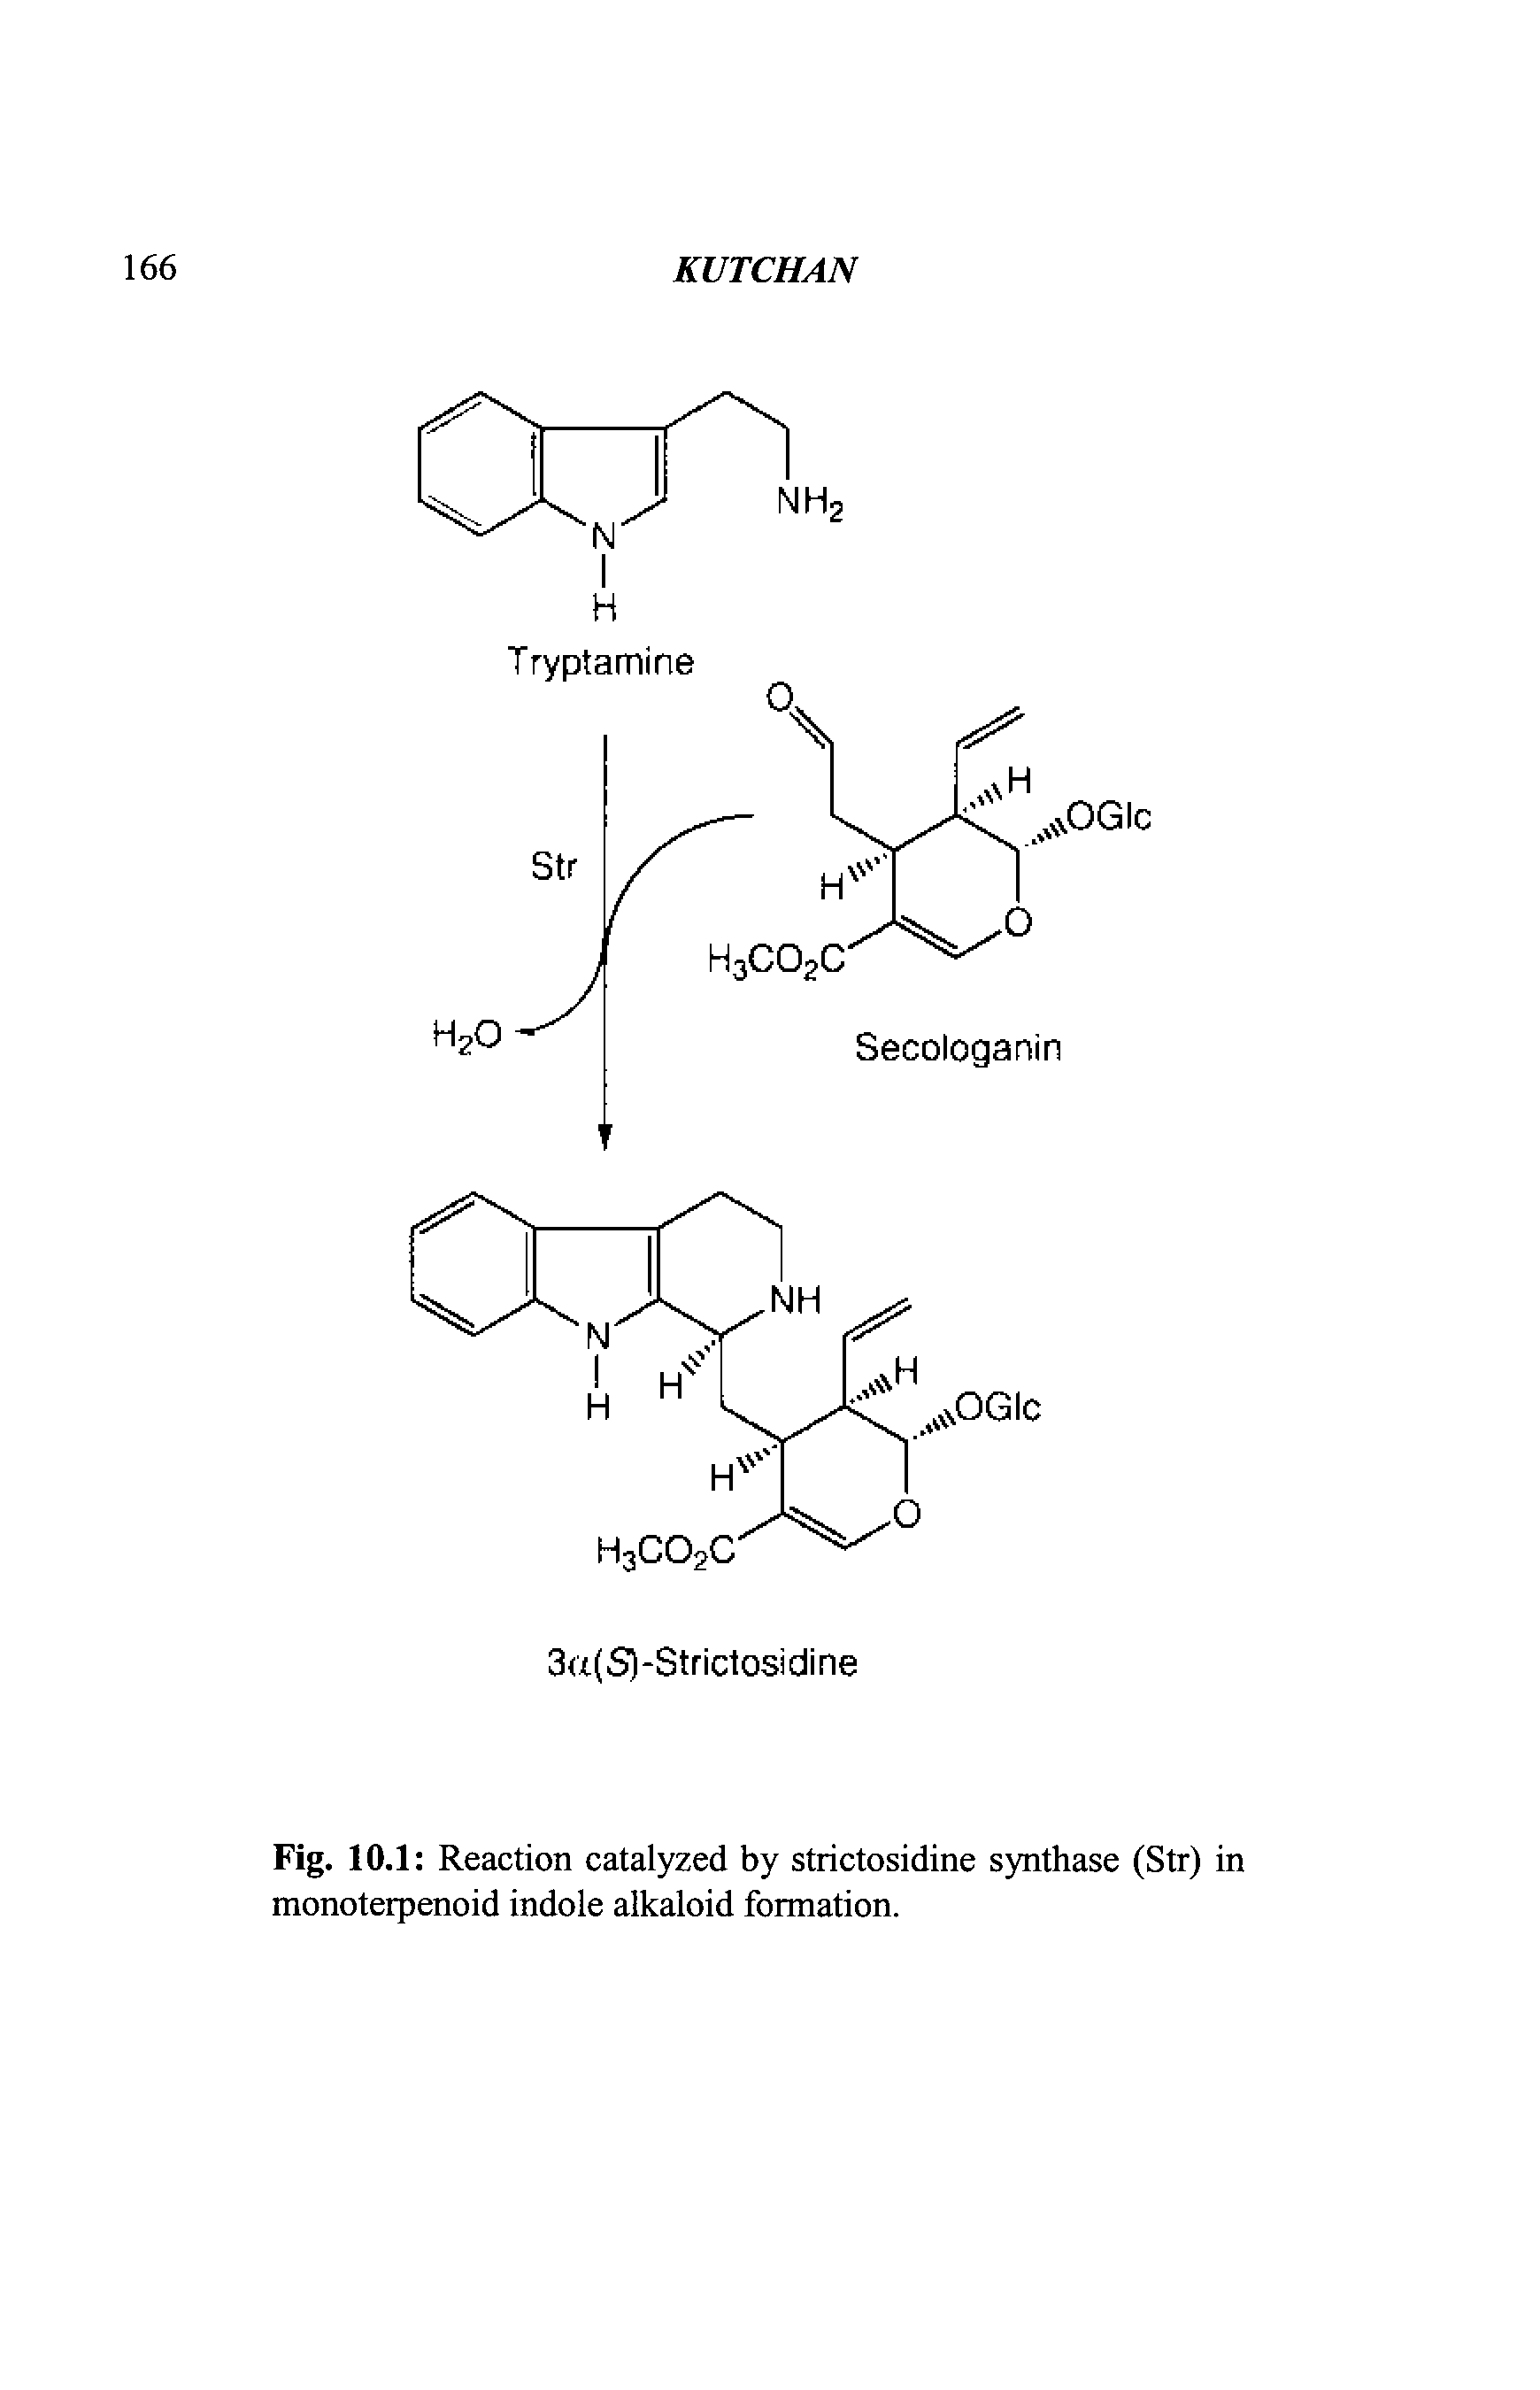 Fig. 10.1 Reaction catalyzed by strictosidine synthase (Str) in monoterpenoid indole alkaloid formation.